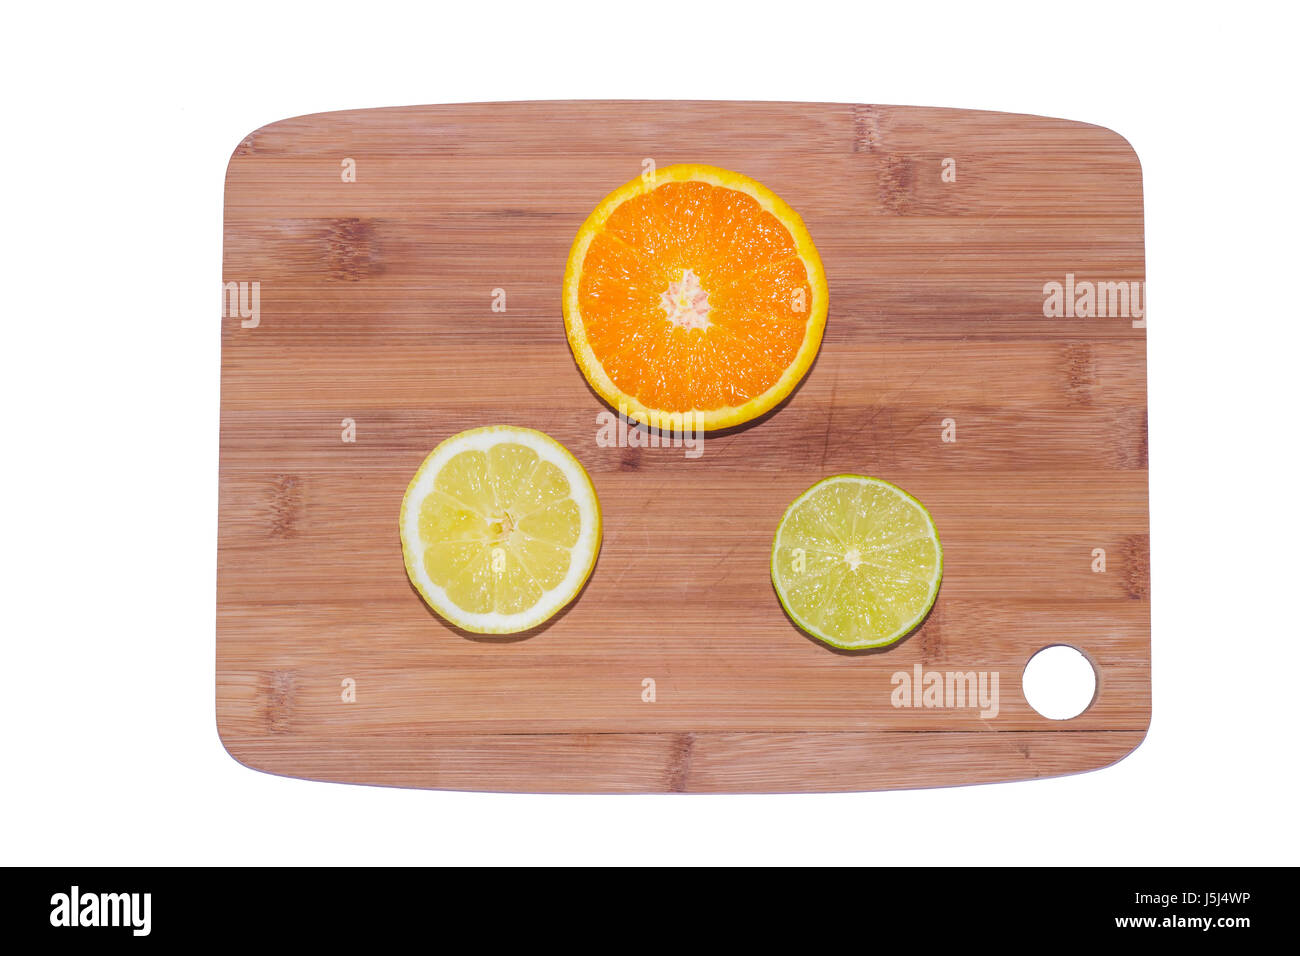 A selection of chopped oranges, lemons and limes on a wooden board on white background. Stock Photo